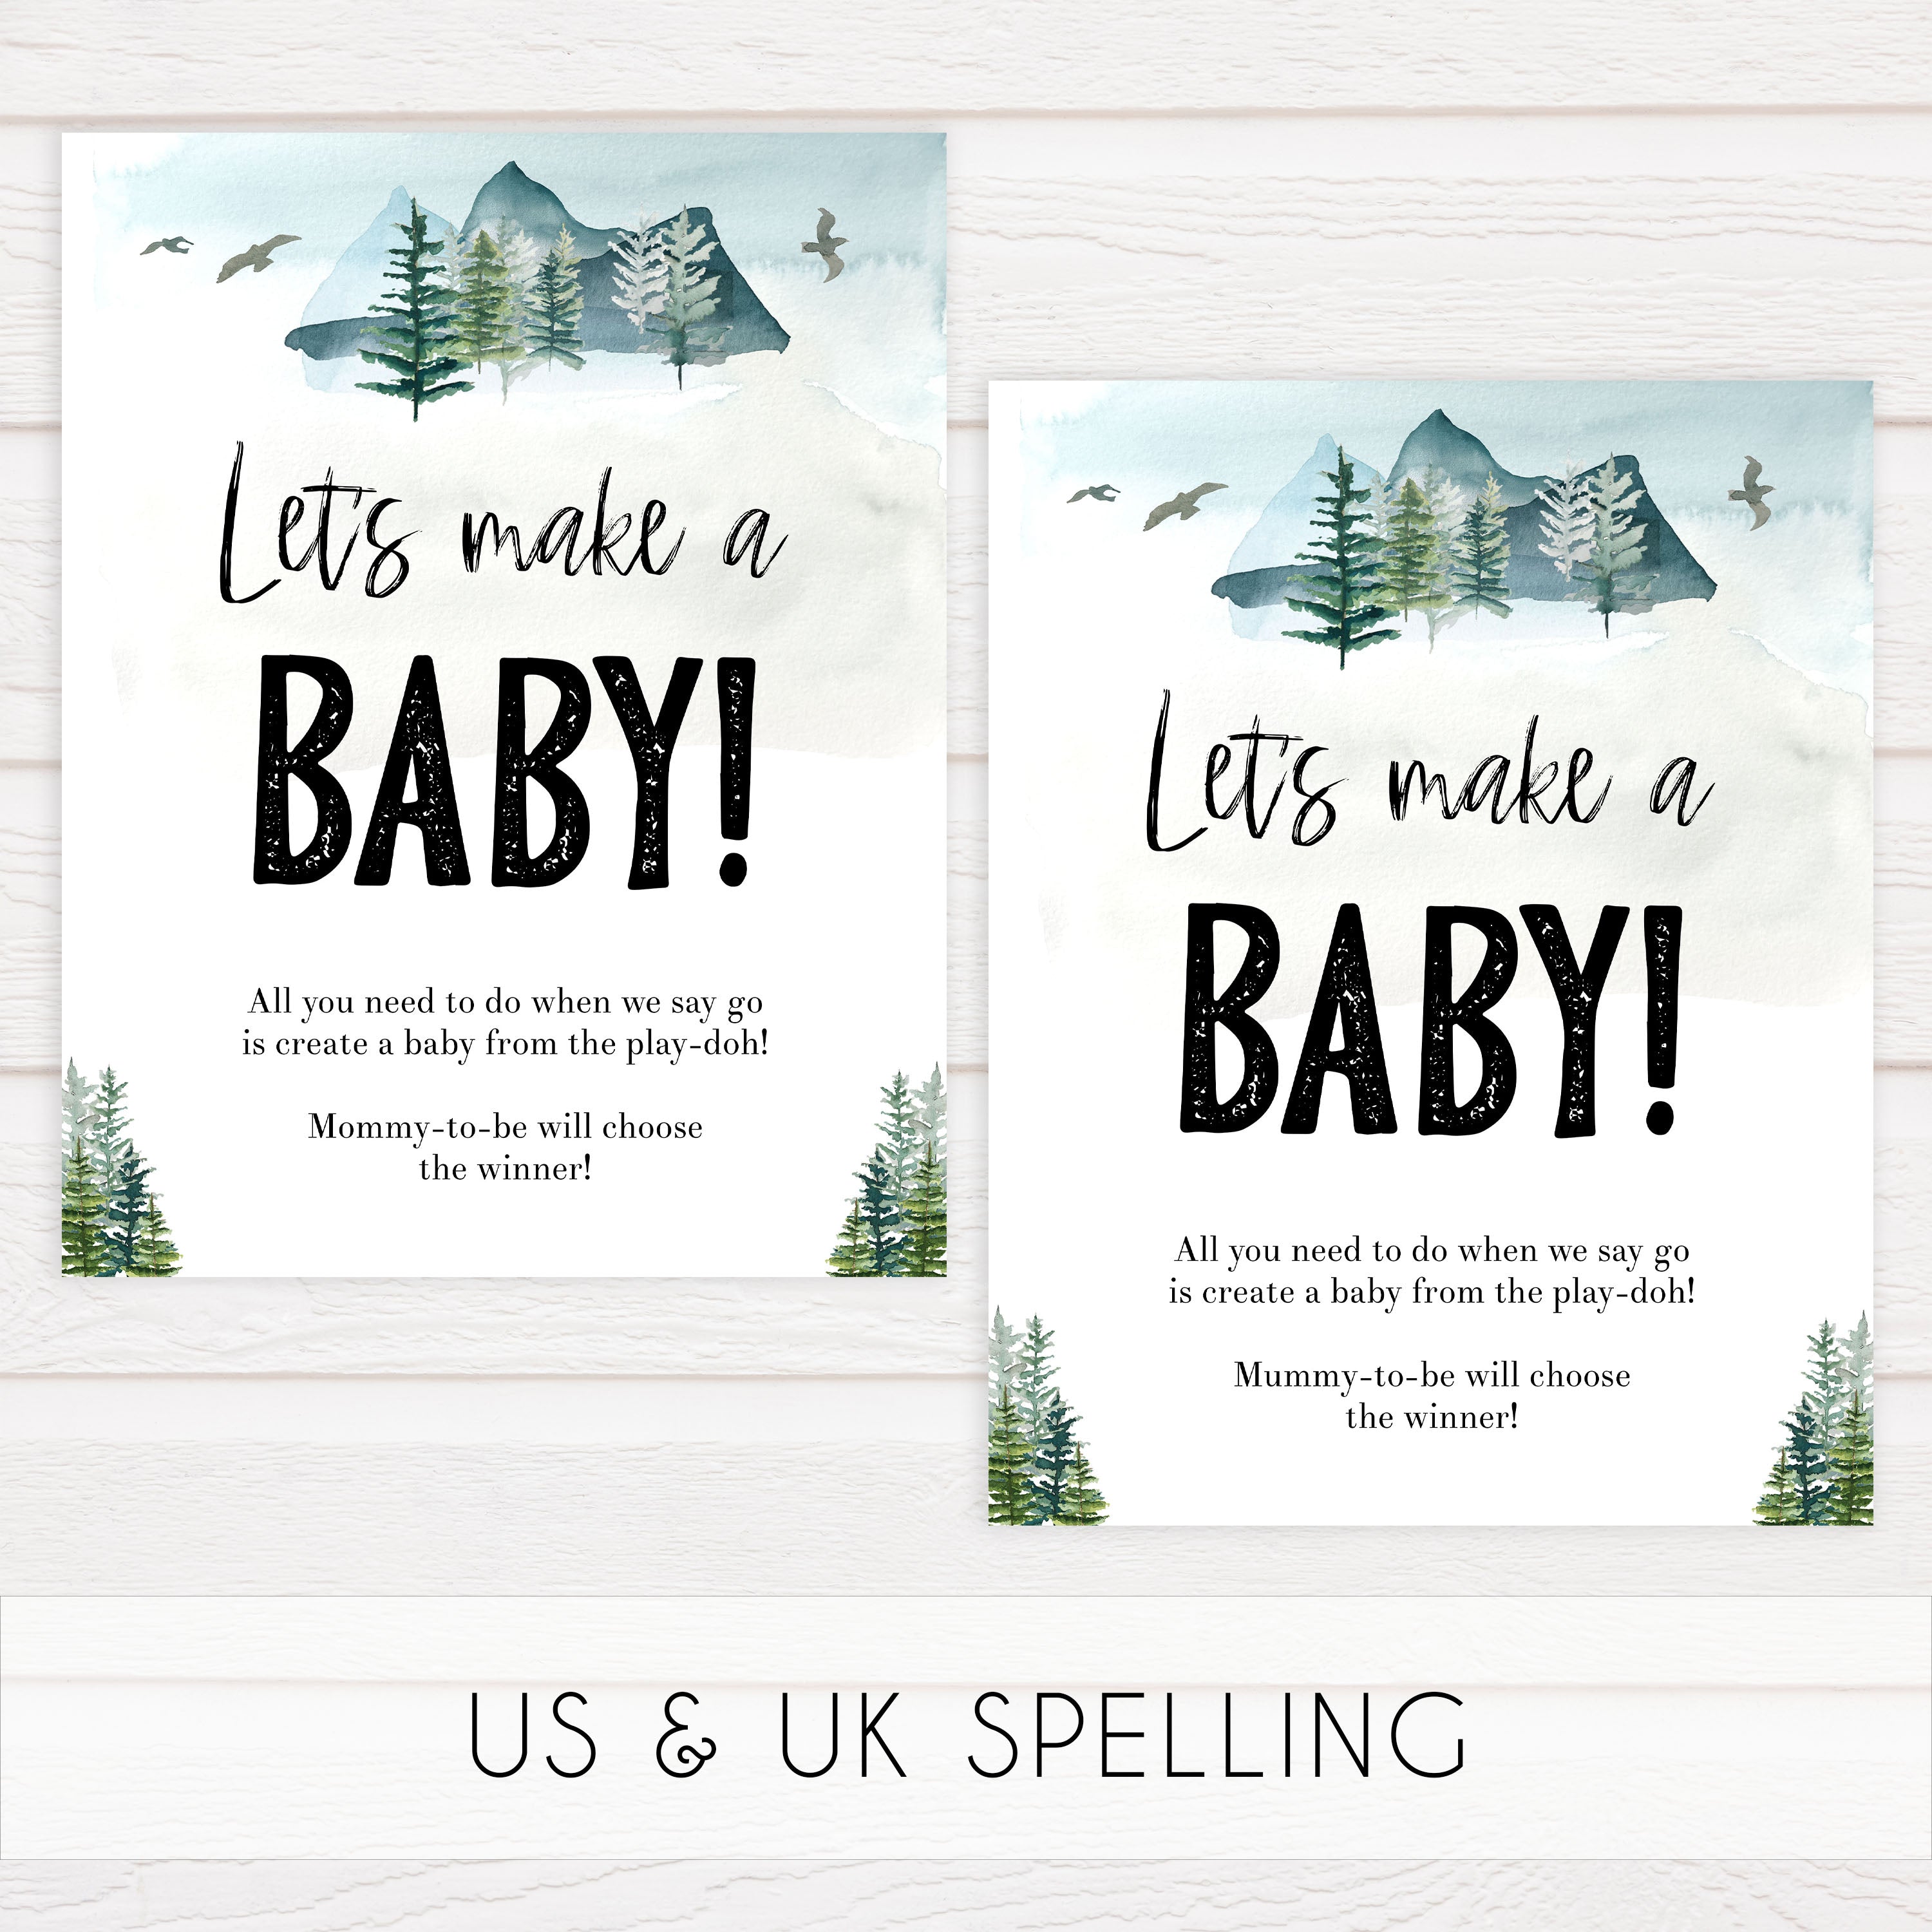 lets make a baby game, Printable baby shower games, adventure awaits baby games, baby shower games, fun baby shower ideas, top baby shower ideas, adventure awaits baby shower, baby shower games, fun adventure baby shower ideas